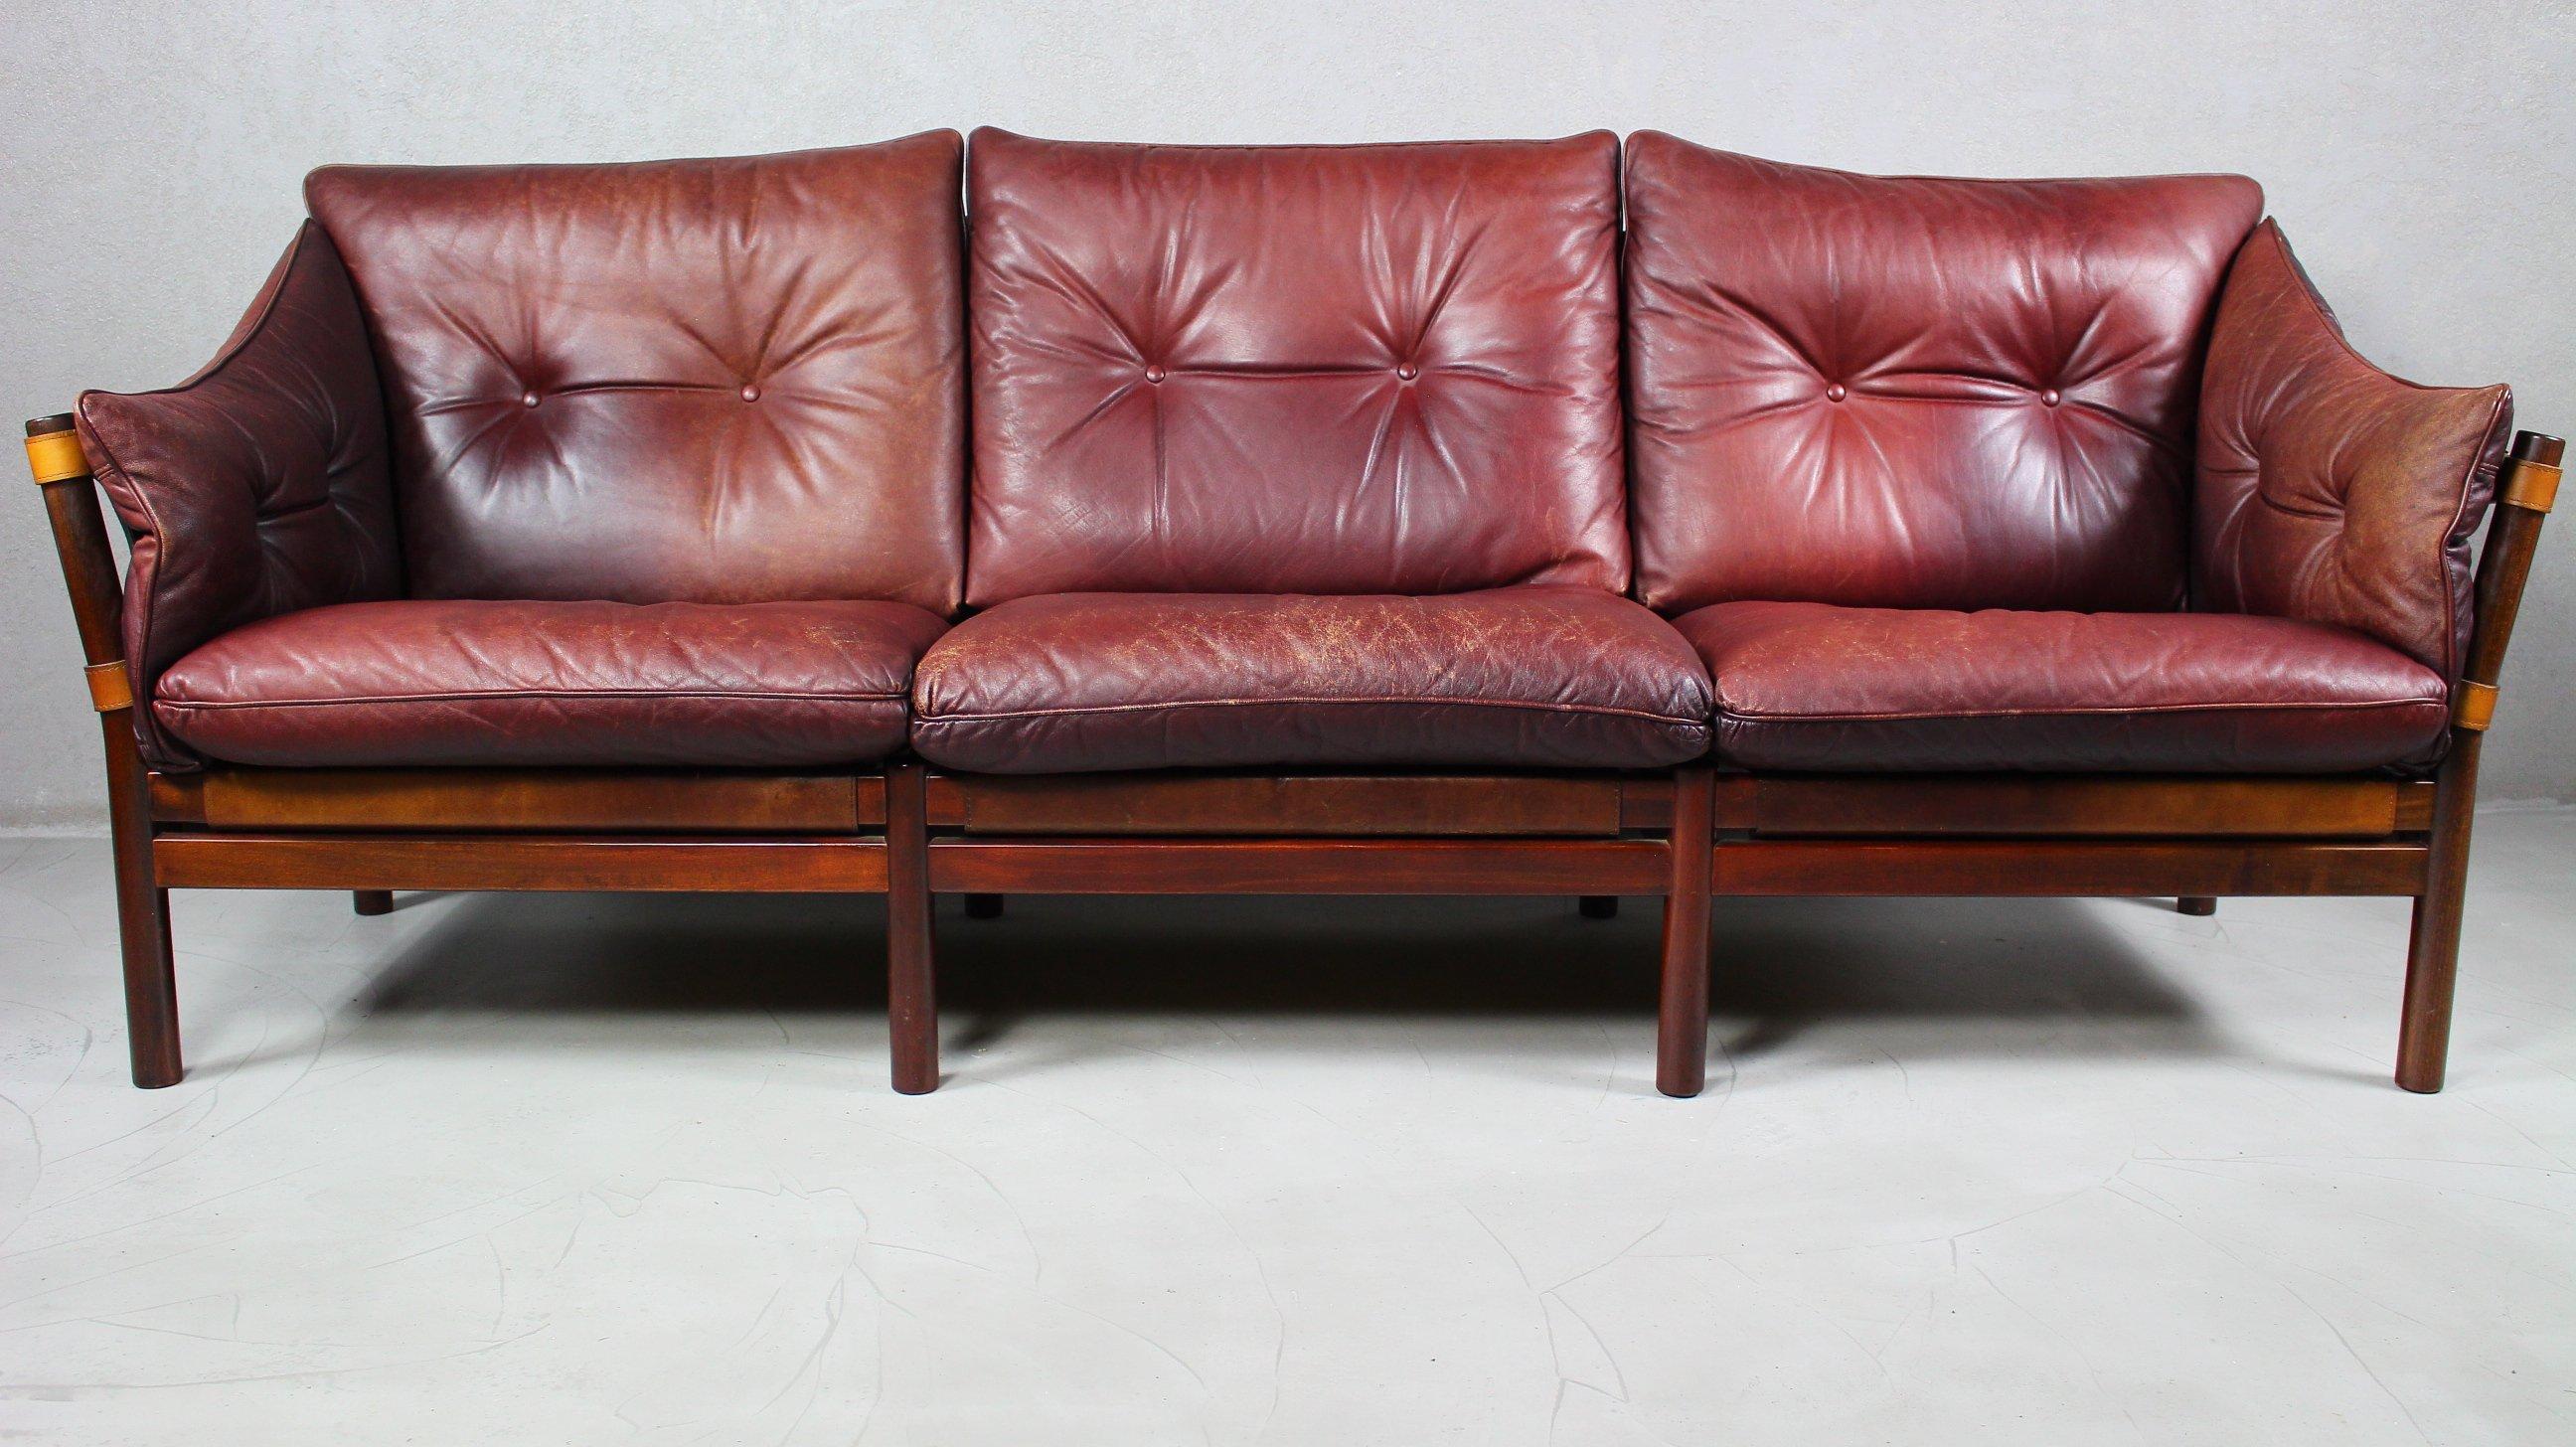 Scandinavian Modern 1960s Leather Sofa Ilona by Arne Norell 'Attributed', Aneby Møbler